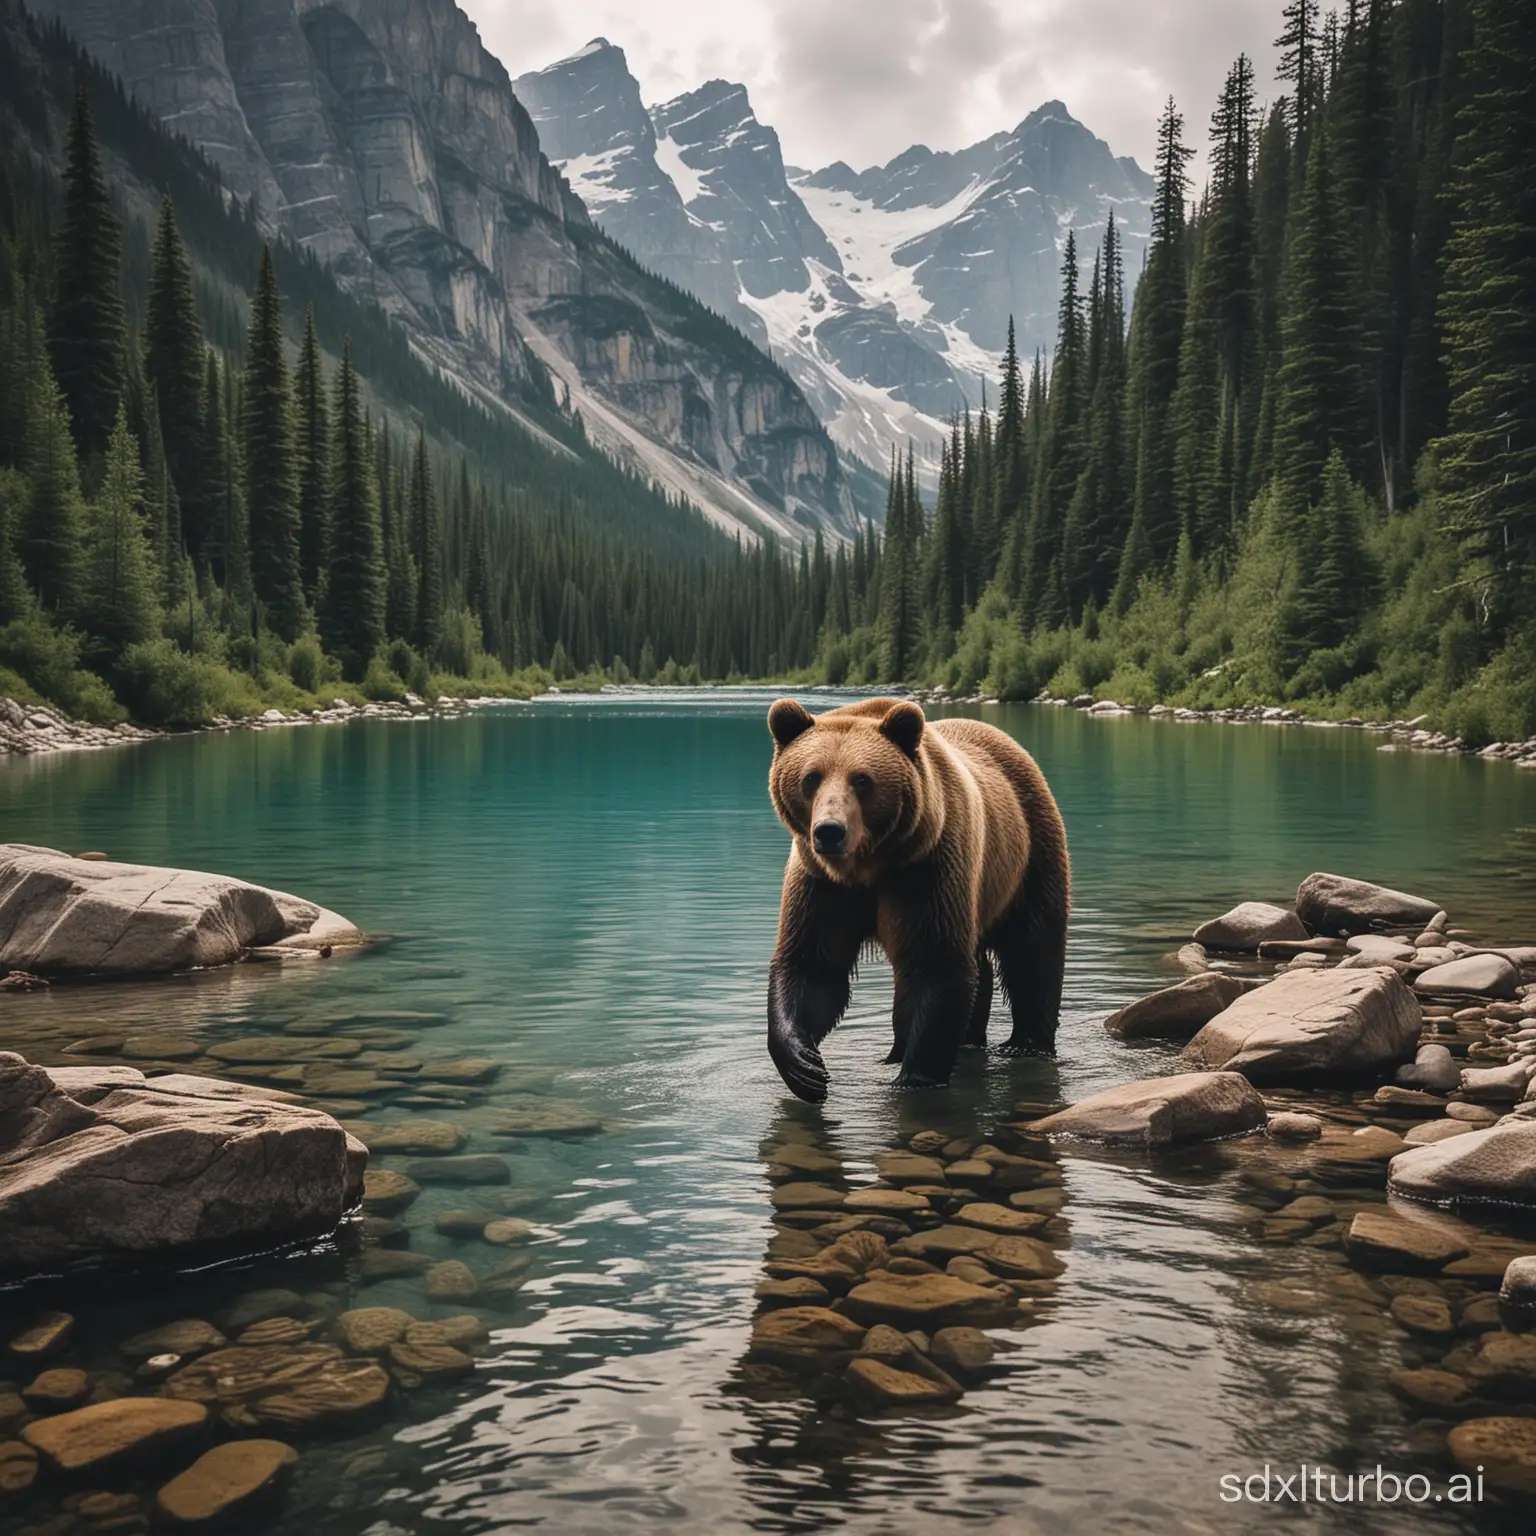 "Good mountains, good waters, there is a bear."